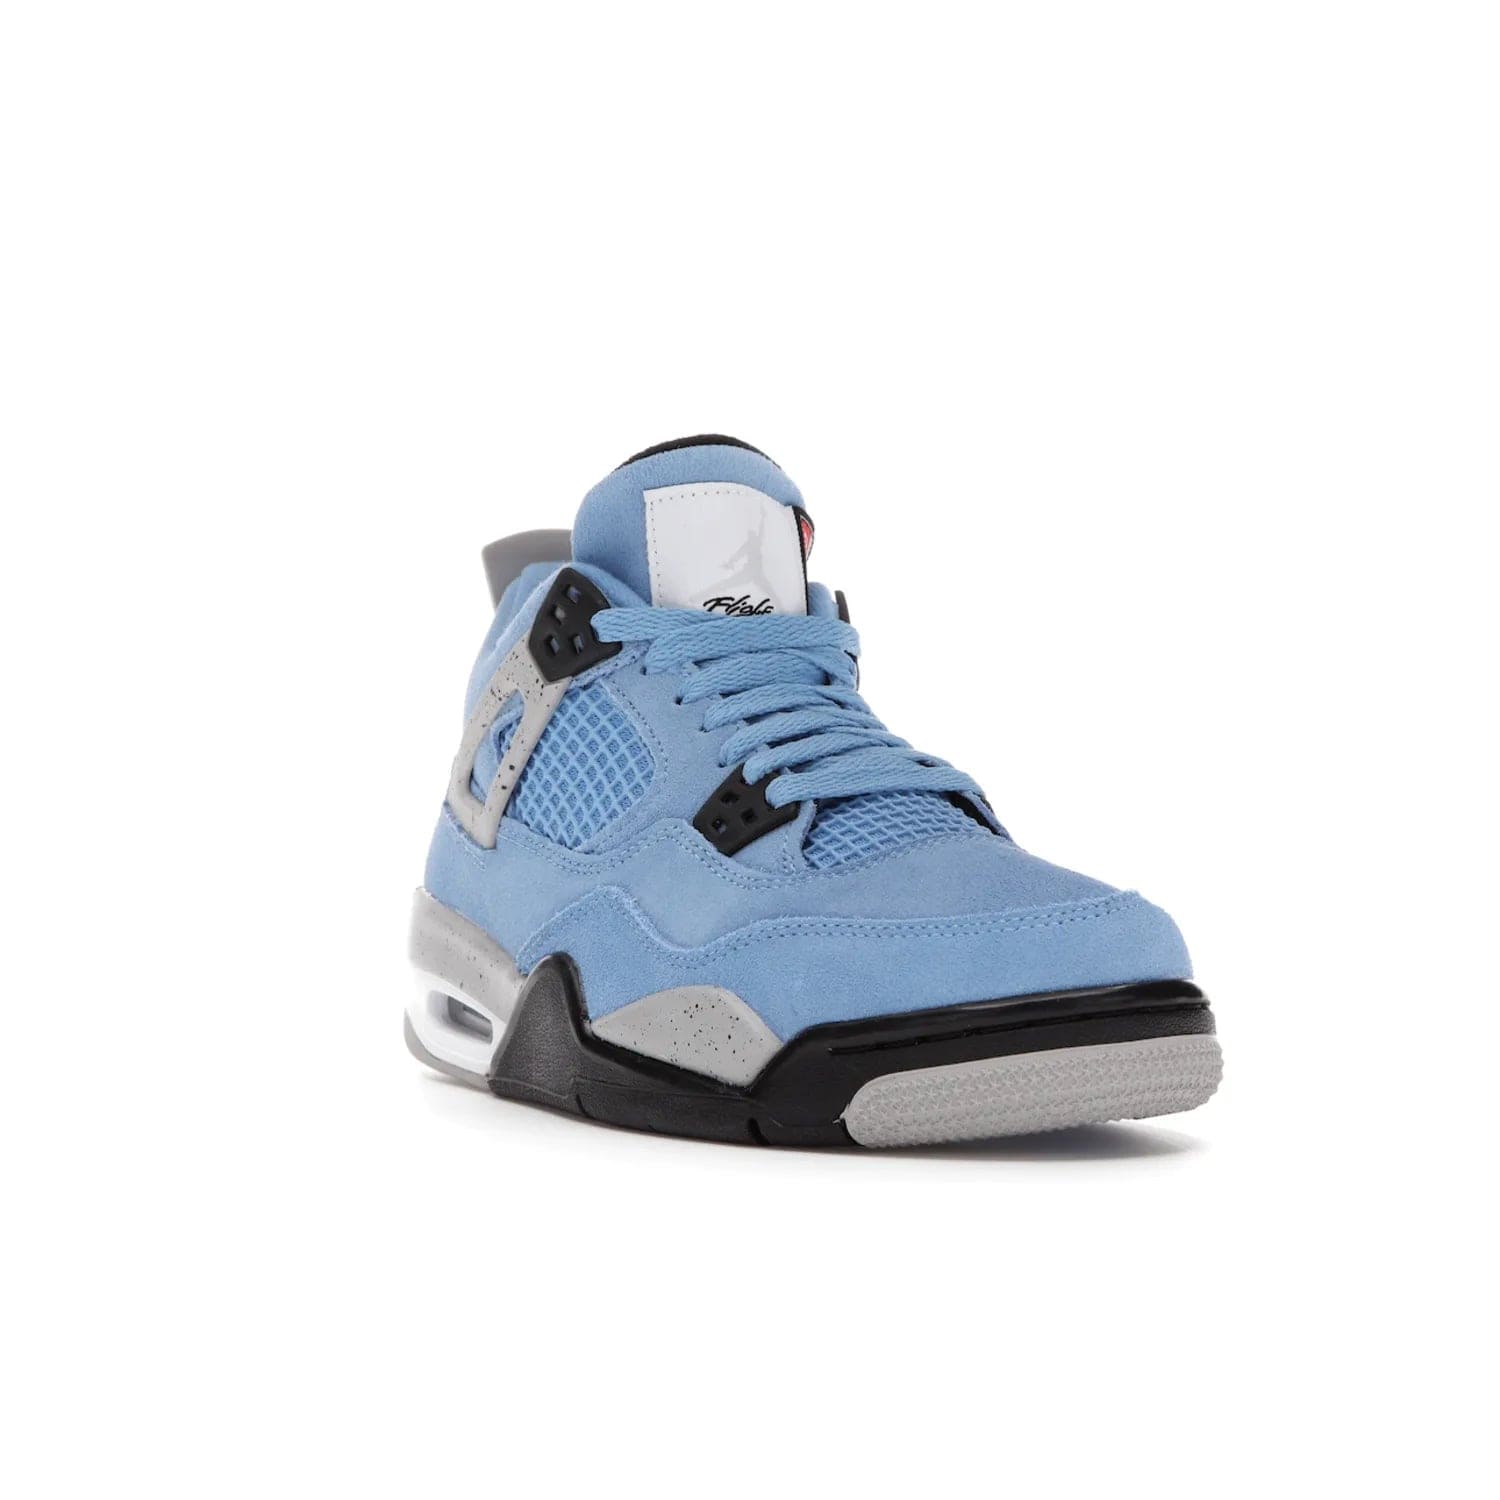 Jordan 4 Retro University Blue (GS) - Image 7 - Only at www.BallersClubKickz.com - Air Jordan 4 Retro University Blue GS: Classic silhouette and vibrant colors. Featuring a suede upper and Jumpman icon, this grade school-size shoe is perfect for collections and retails at $150.